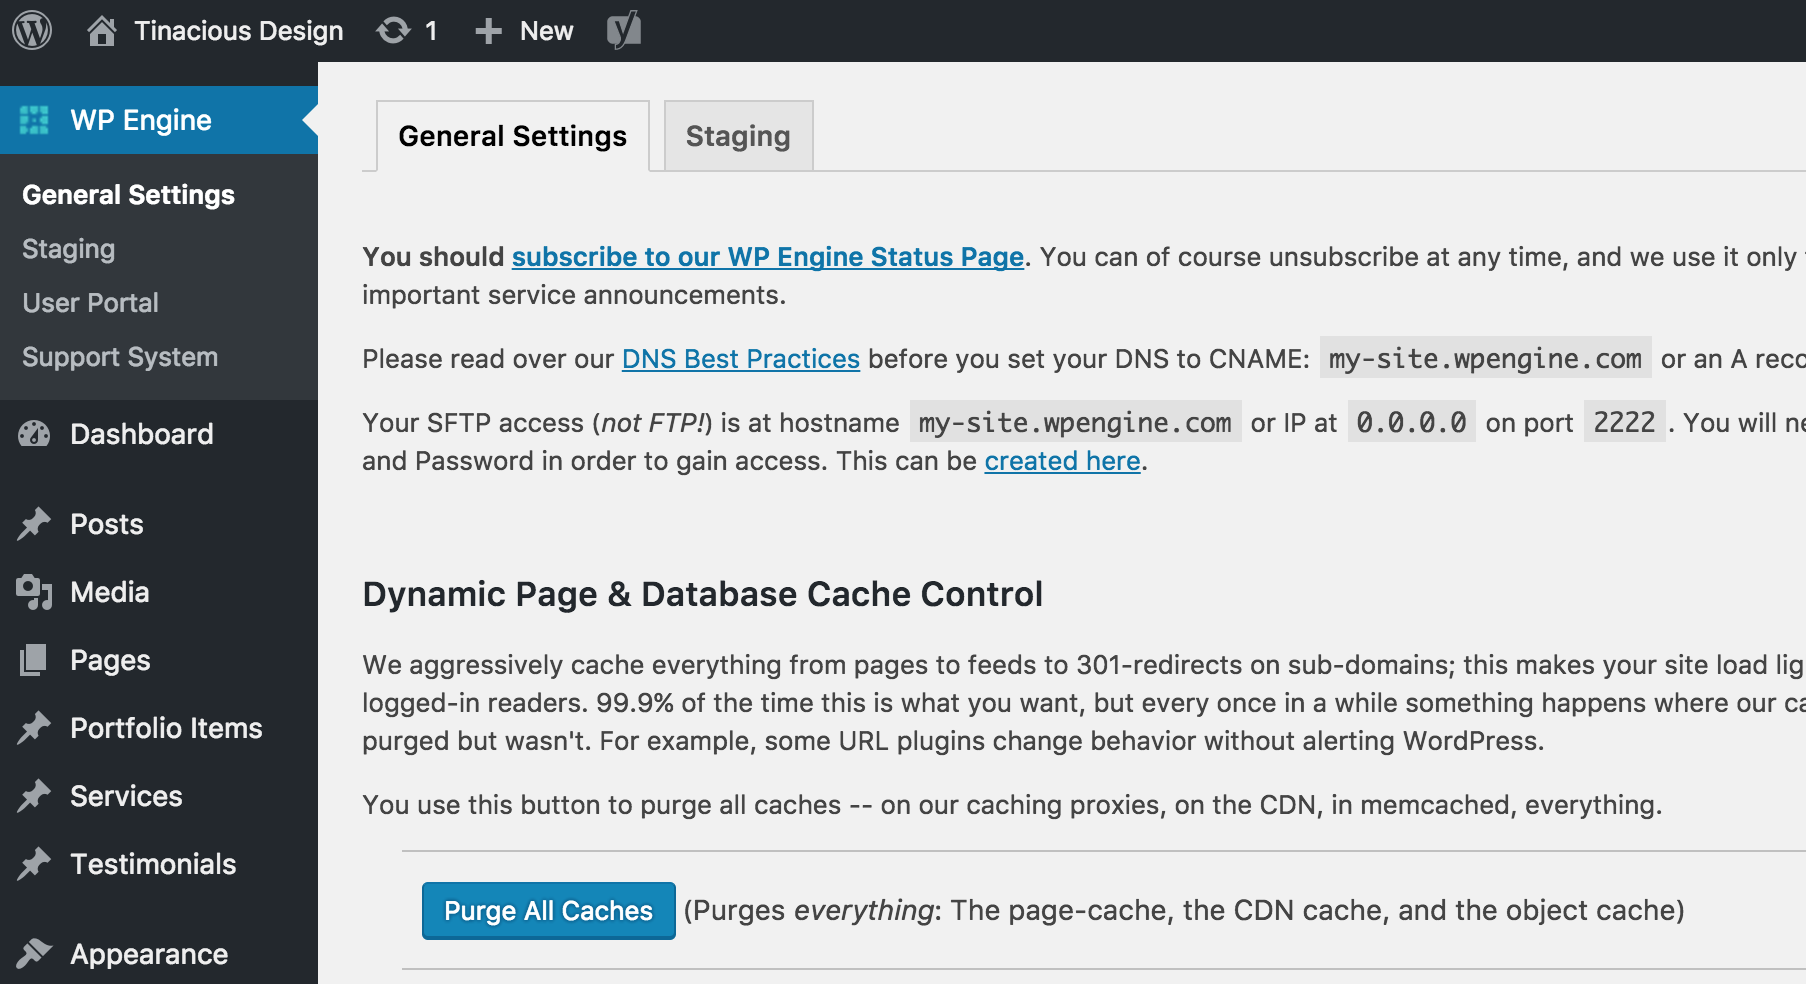 Clear cache on WP Engine using the WP Engine Purge All Caches button